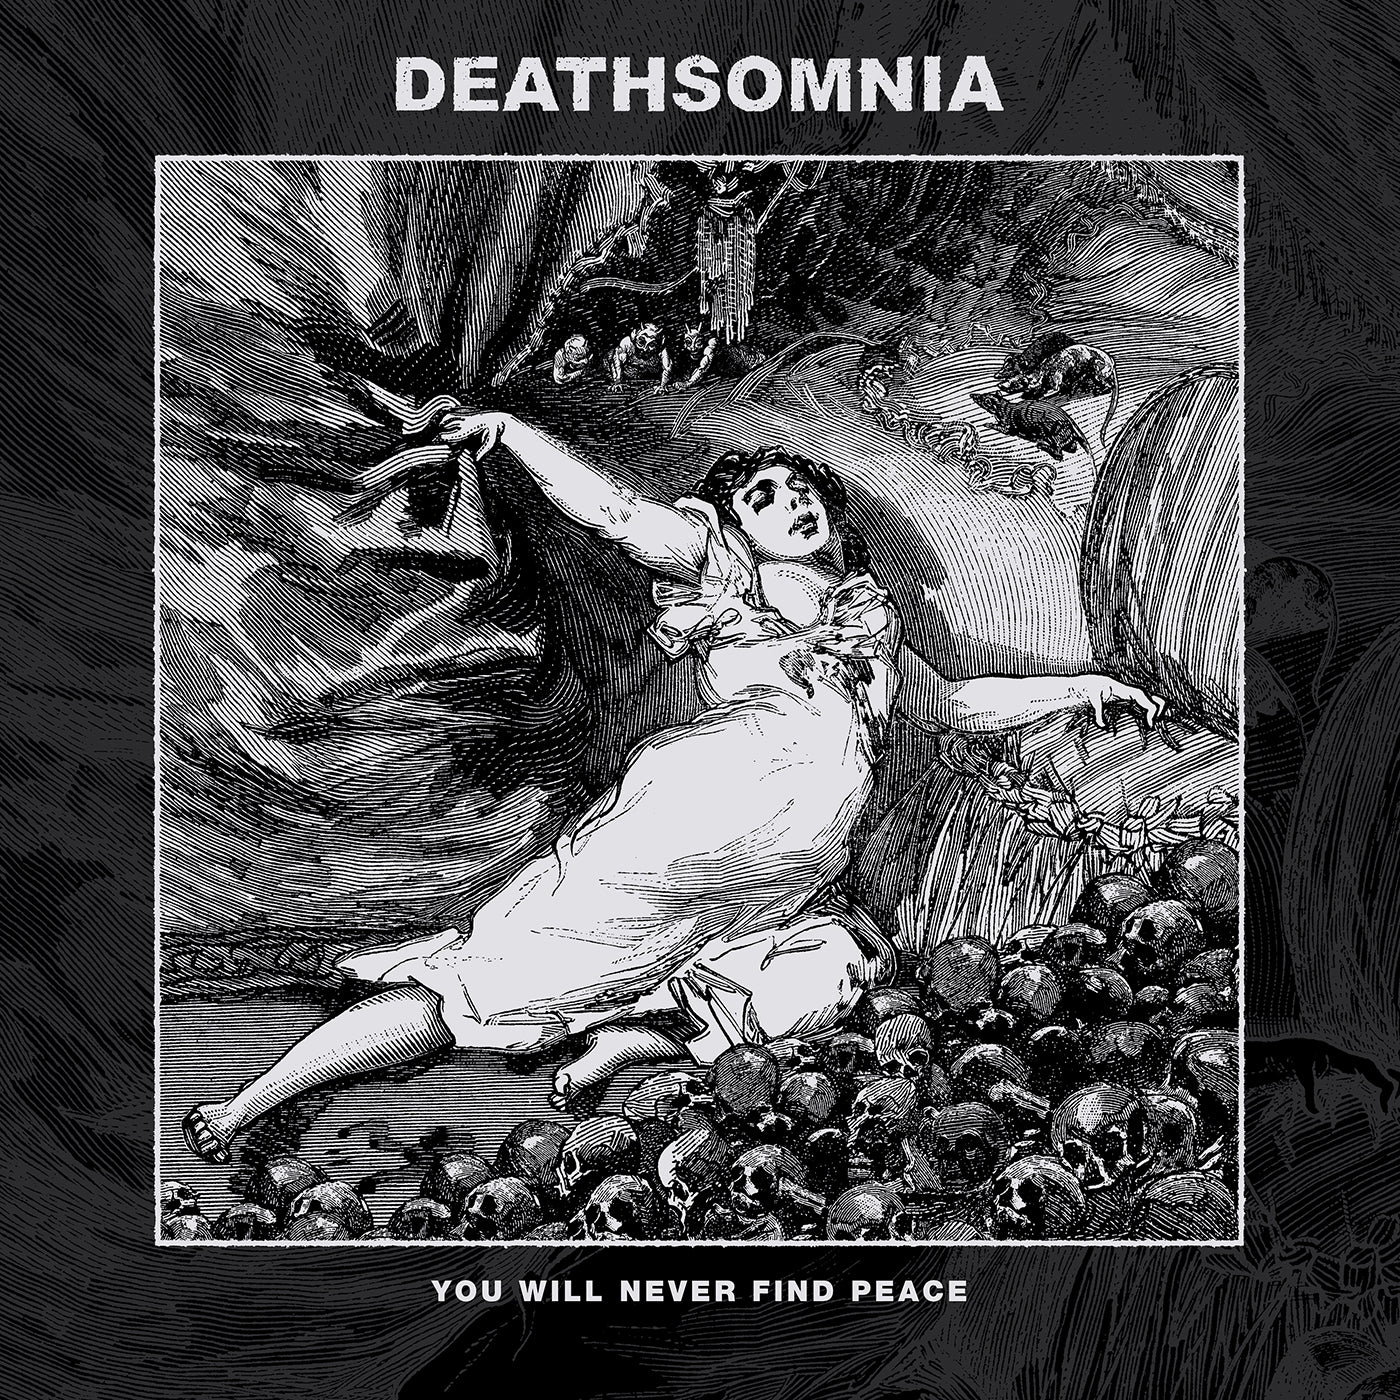 DEATHSOMNIA "You Will Never Find Peace" CD